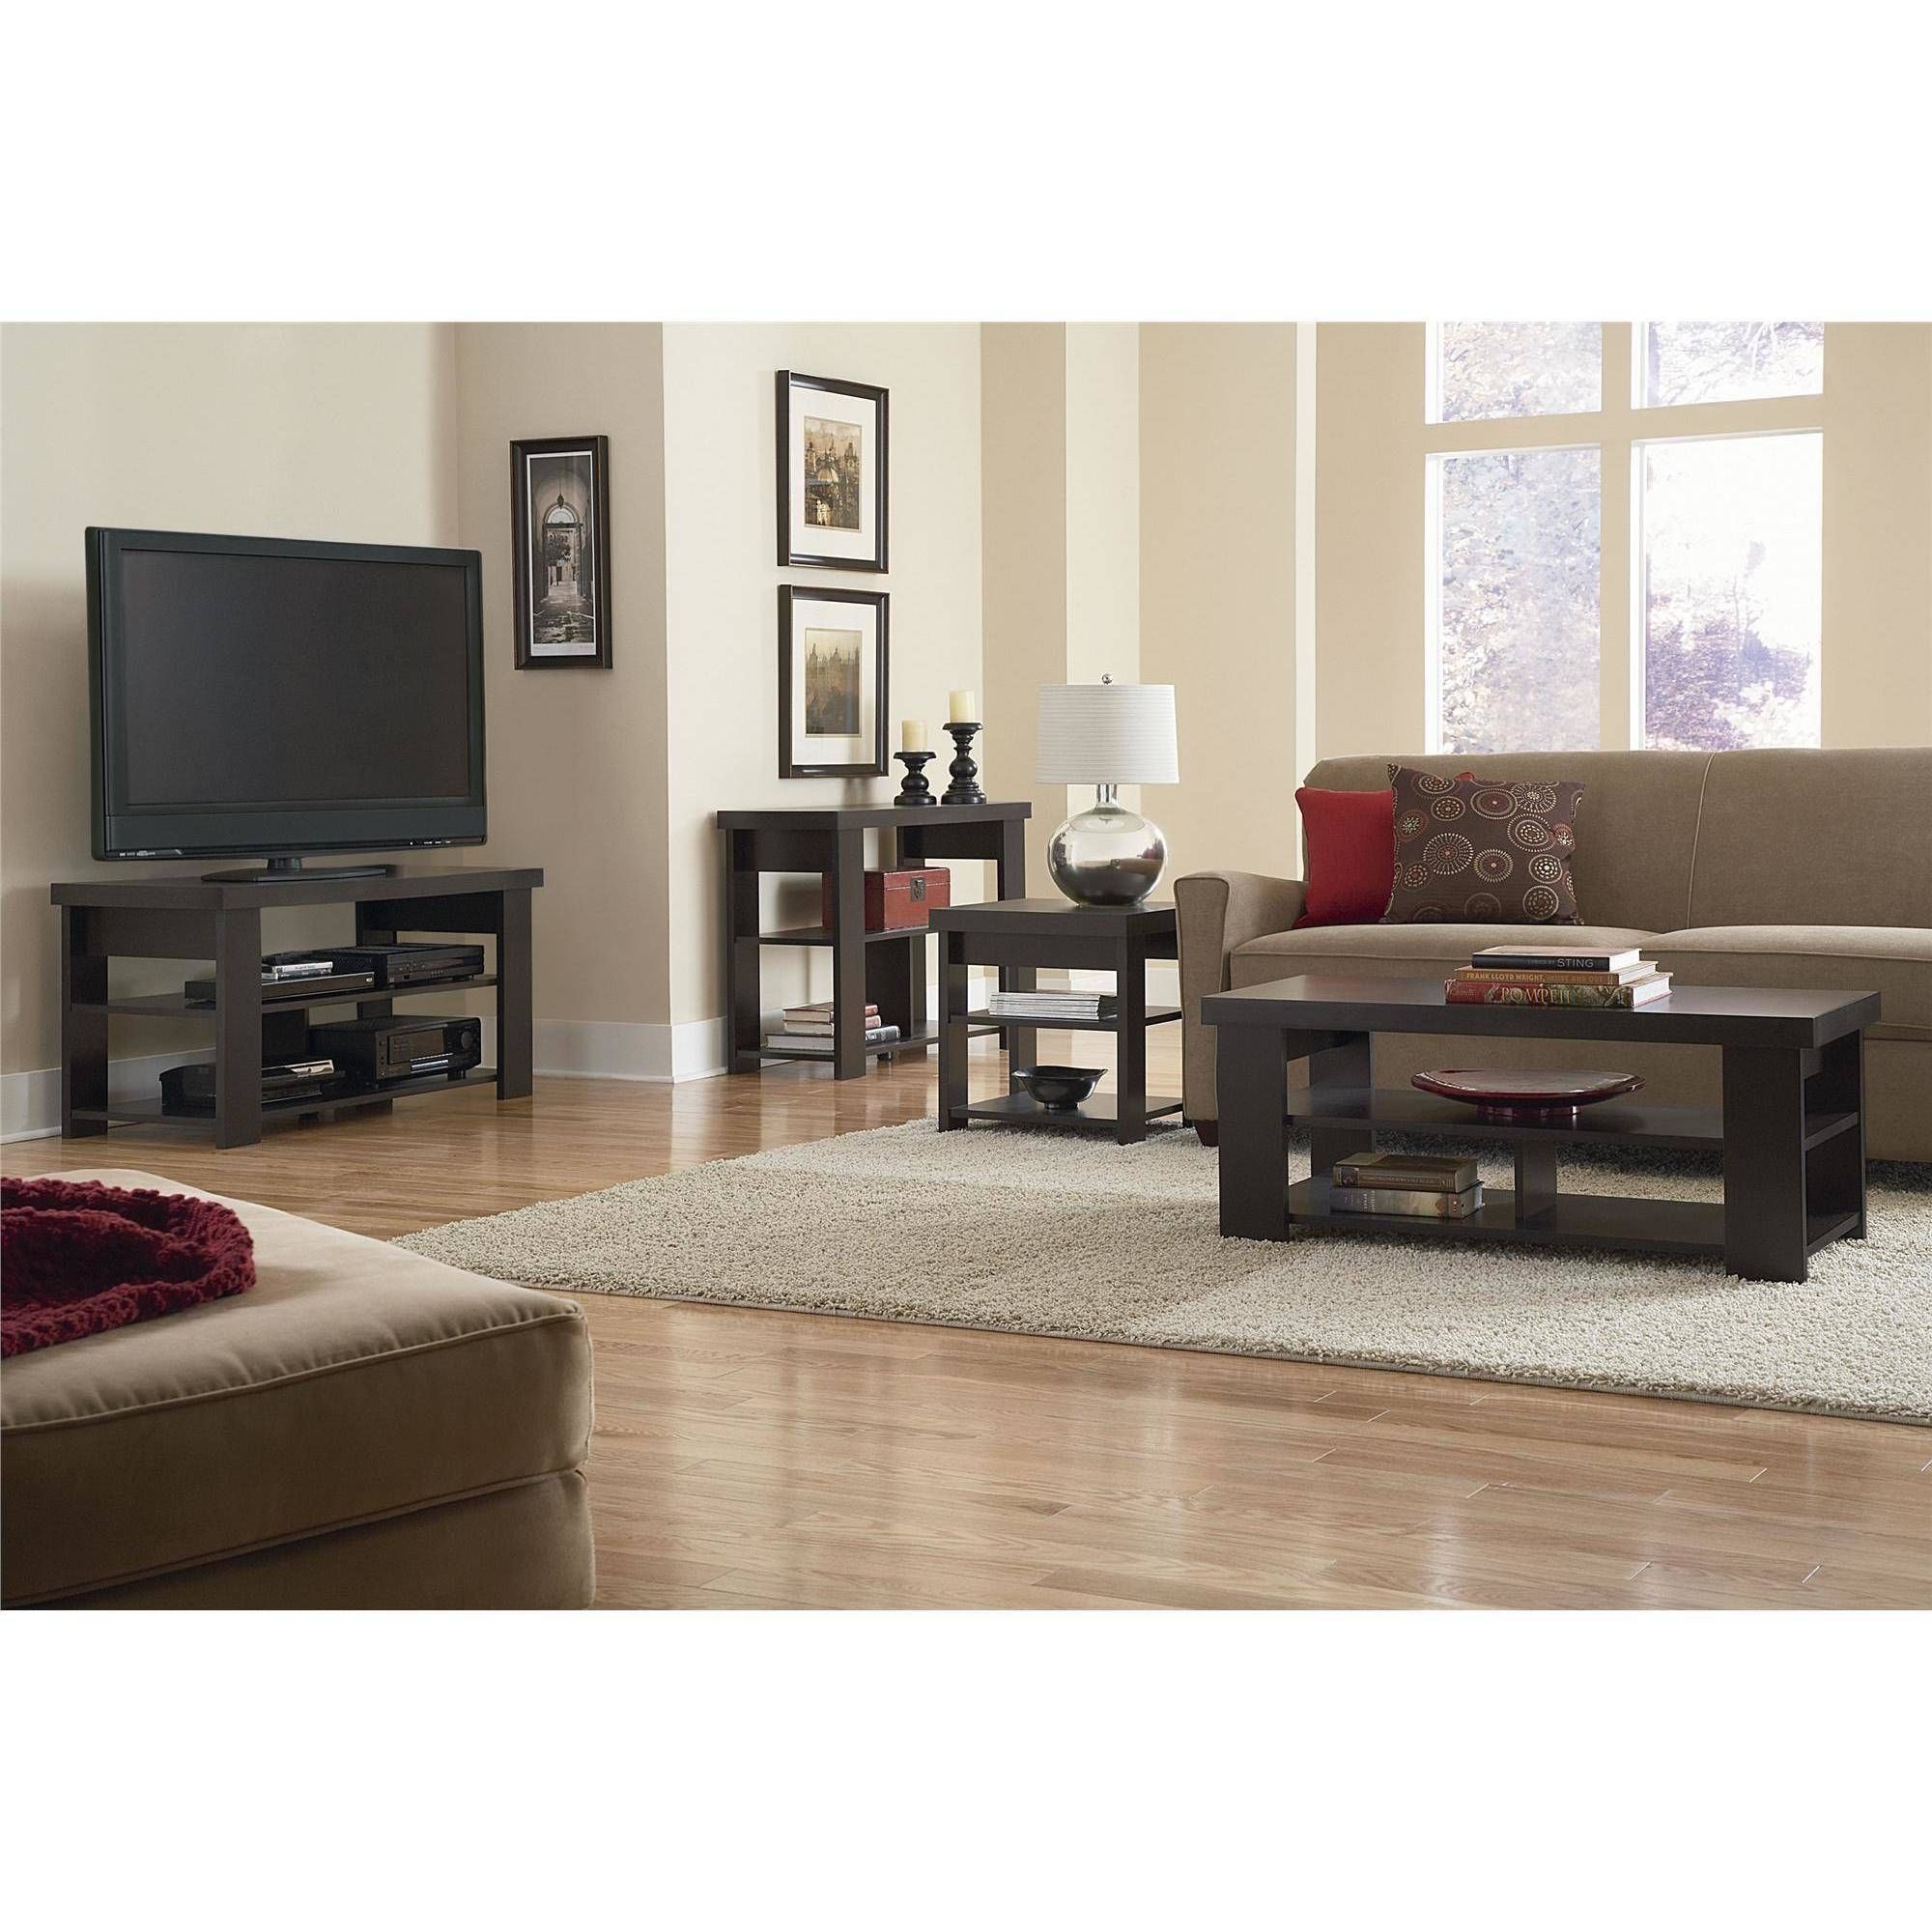 Ameriwood Home Jensen Coffee Table, Multiple Colors – Walmart For Most Popular Jensen 5 Piece Counter Sets (View 15 of 20)